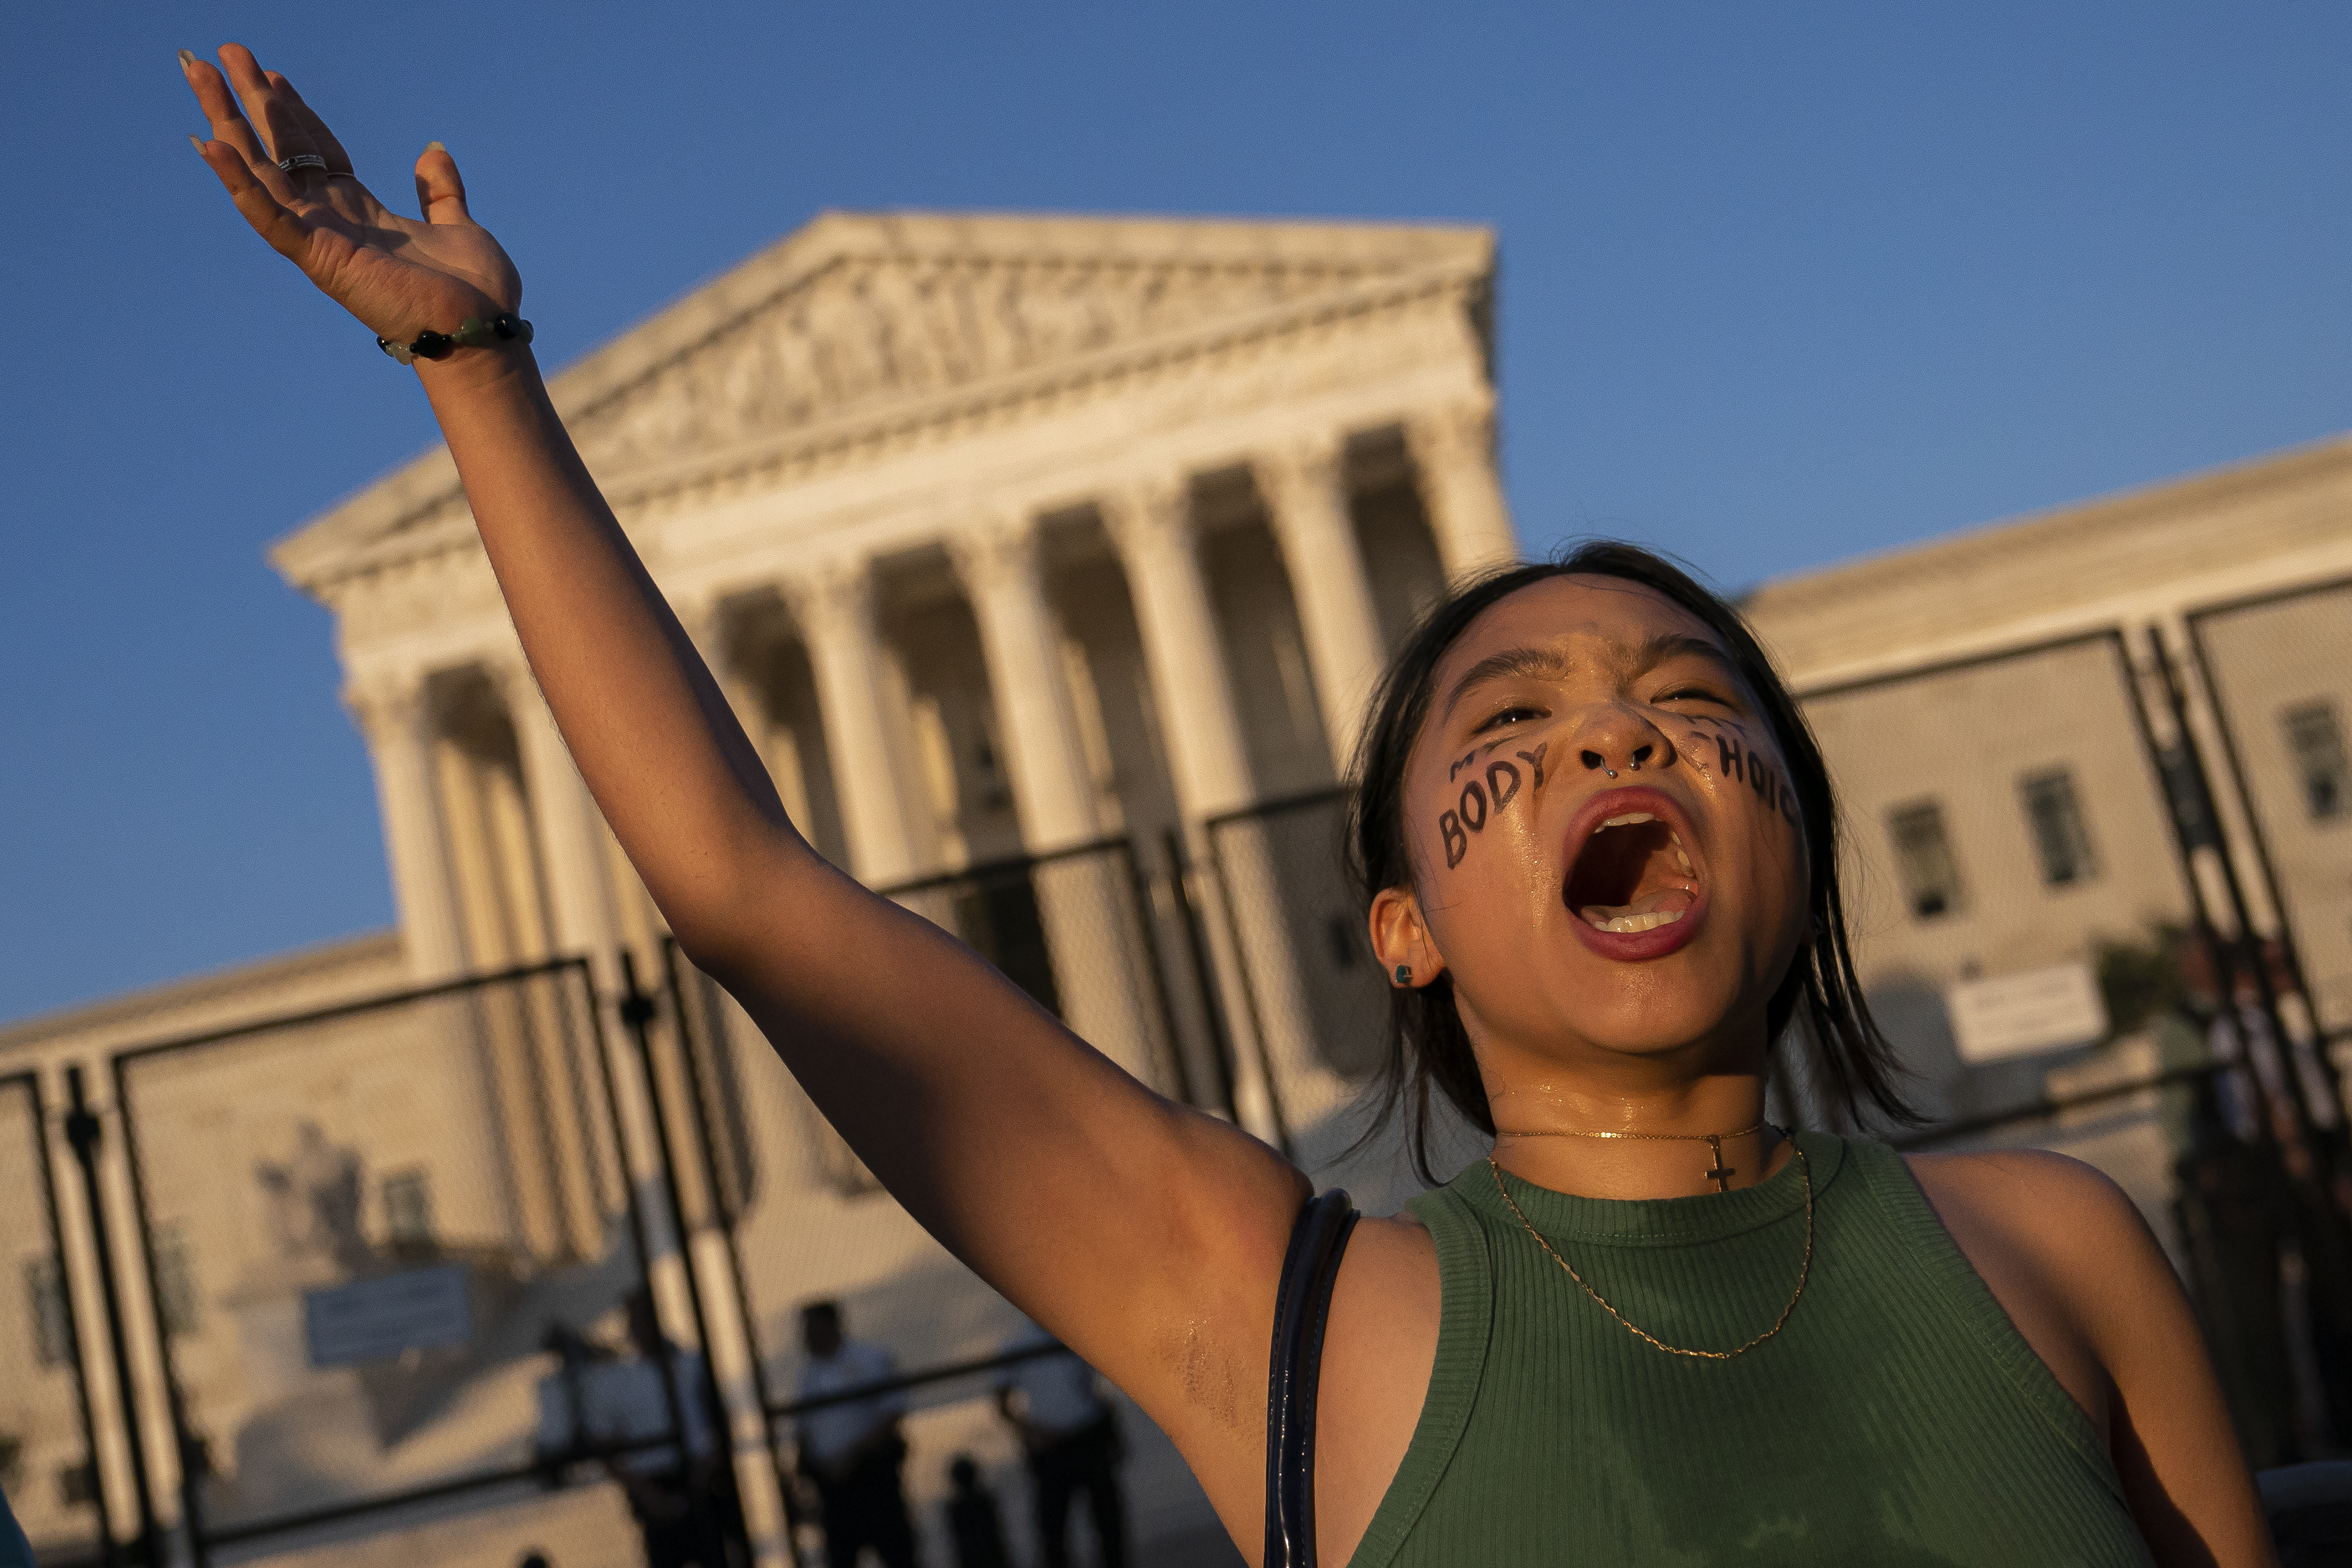 Abortion right demonstrator Robin Gwak chants in front of the Supreme Court building on Saturday following the overturning of Roe v Wade.